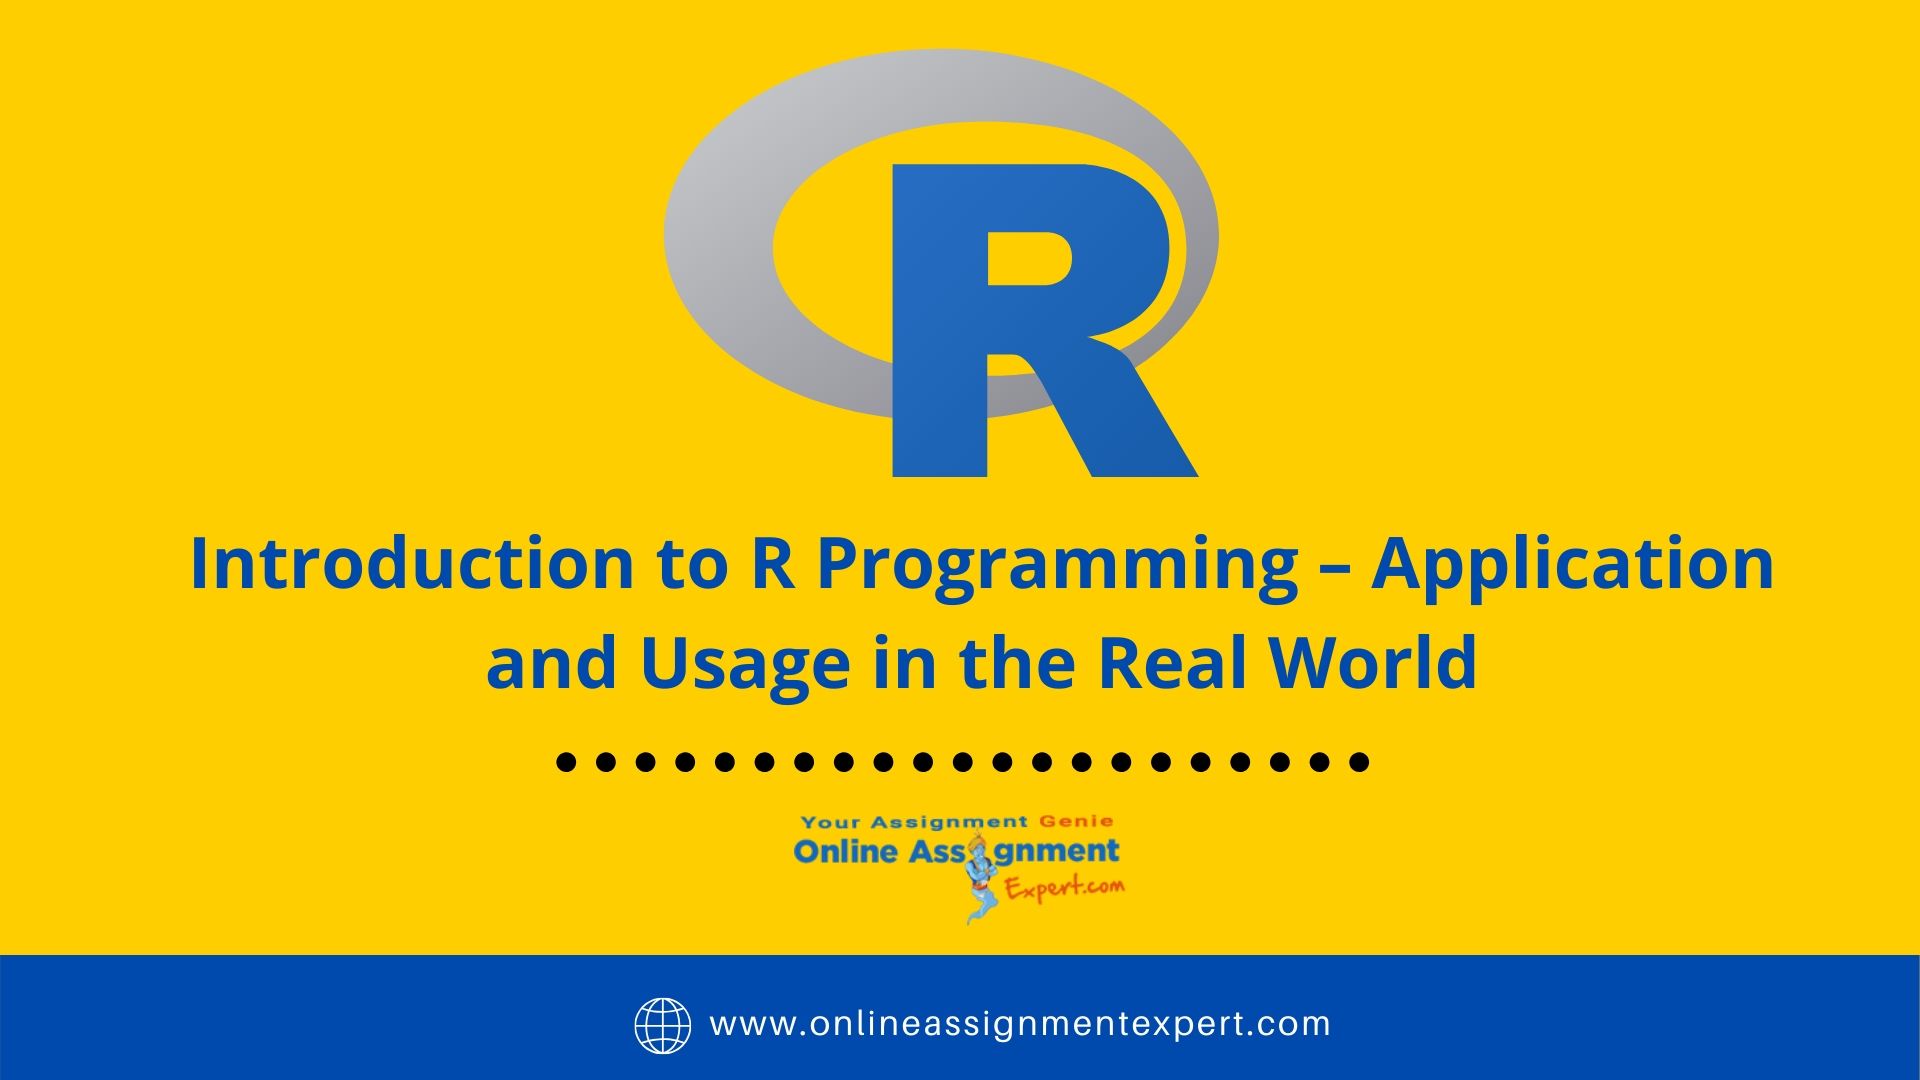 Introduction to R Programming - Application and Usage in the Real World